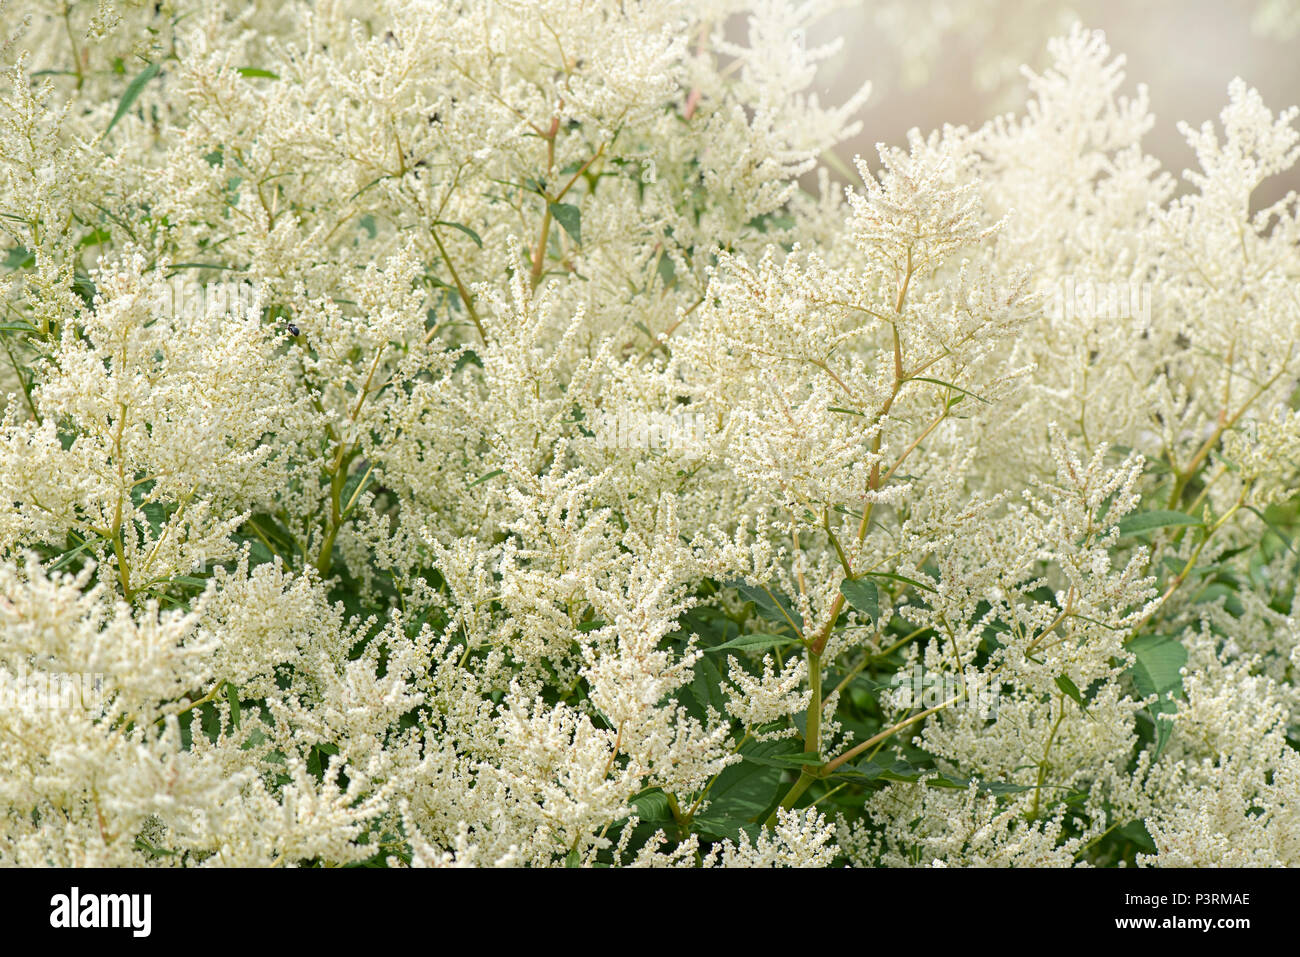 Close-up image of the summer flowering, white feathery flowers of the Astilbe plant Stock Photo